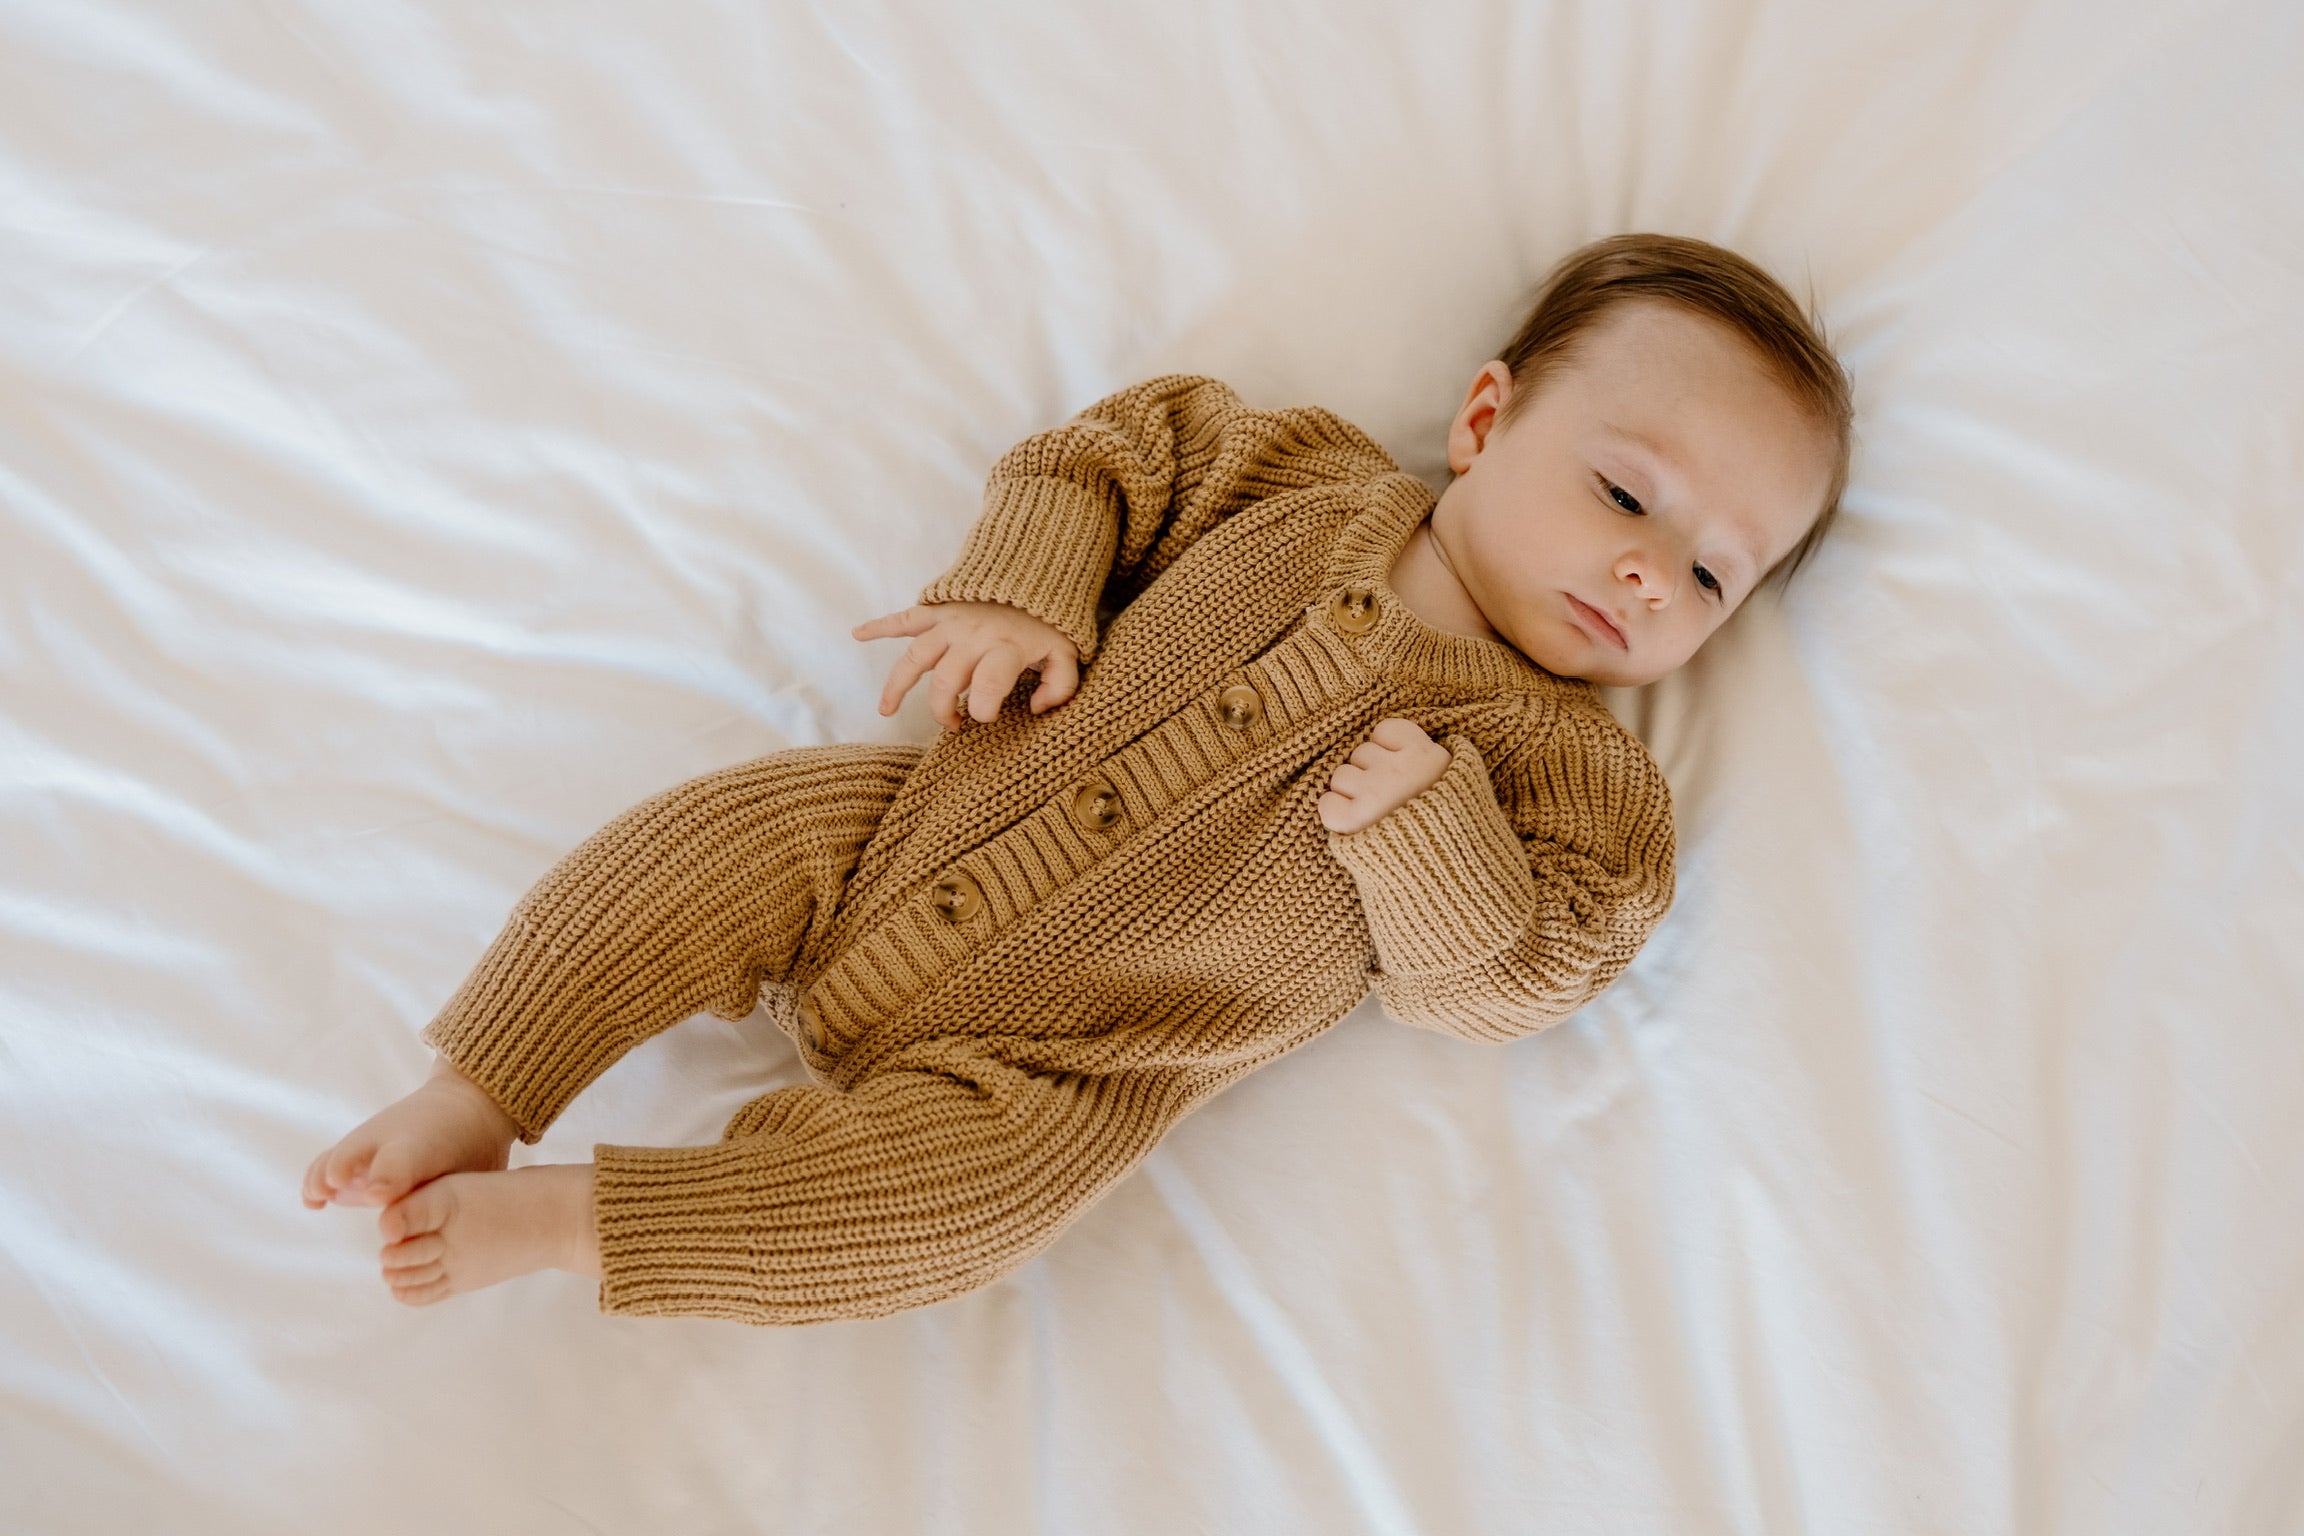 Winnie + Crew comfortable and stylish onesies for newborns in modern, earth-tone colors